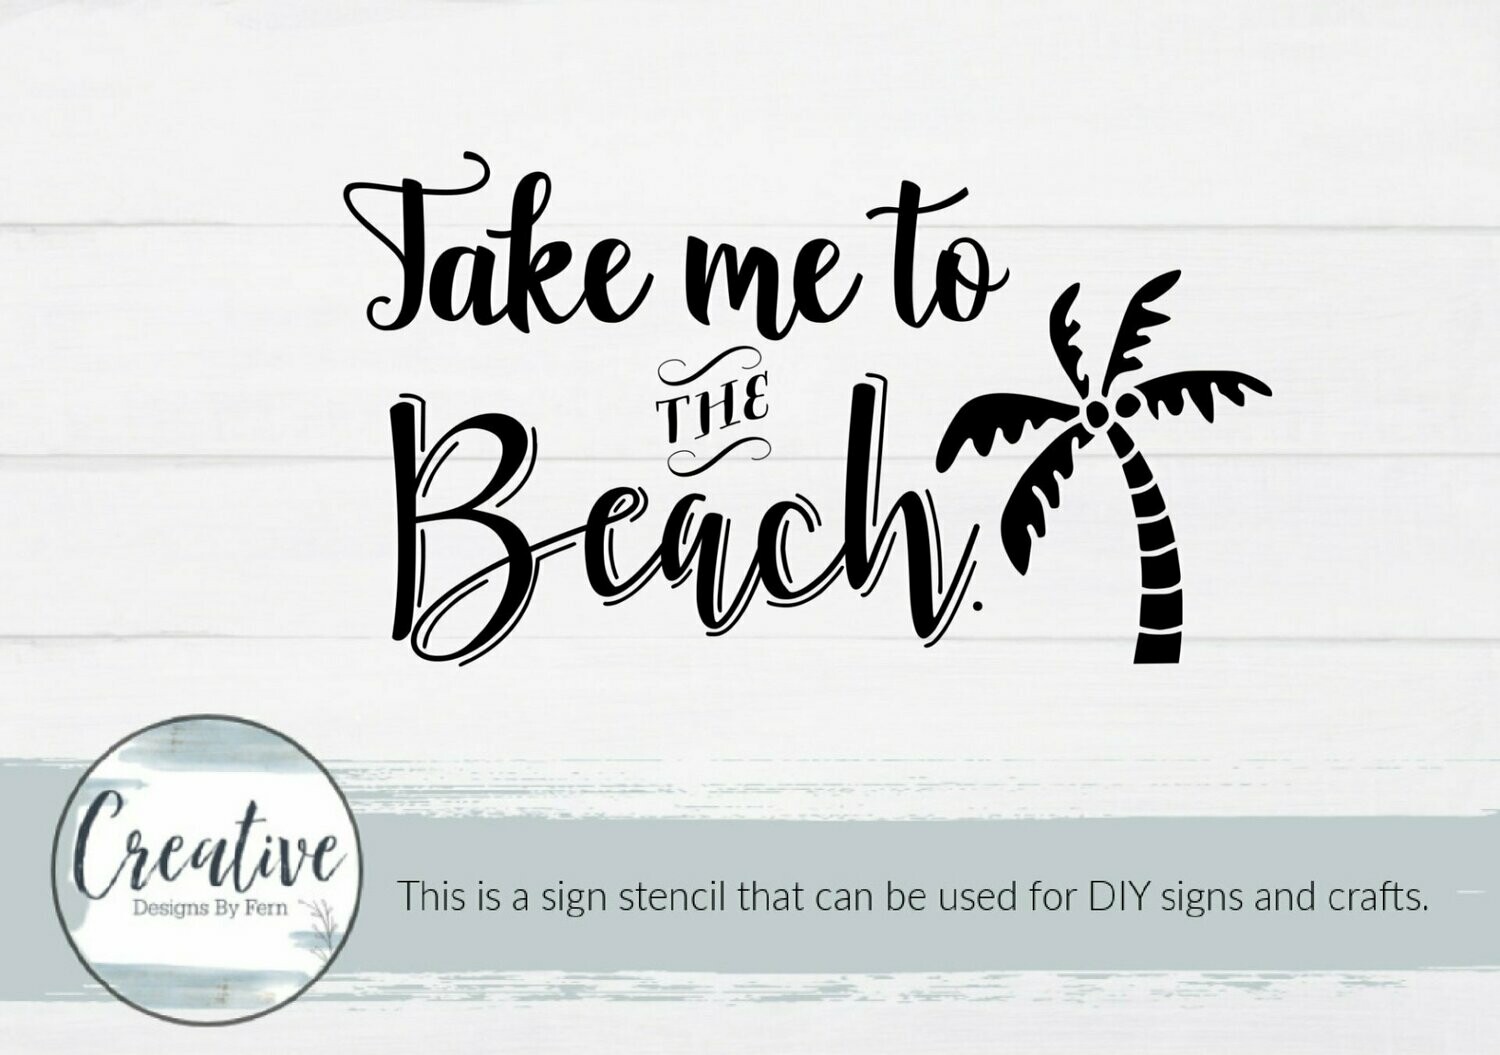 Take Me To The Beach Sign Stencil, Stencil or Decal: Sign Stencil, Size: 6" x 11"